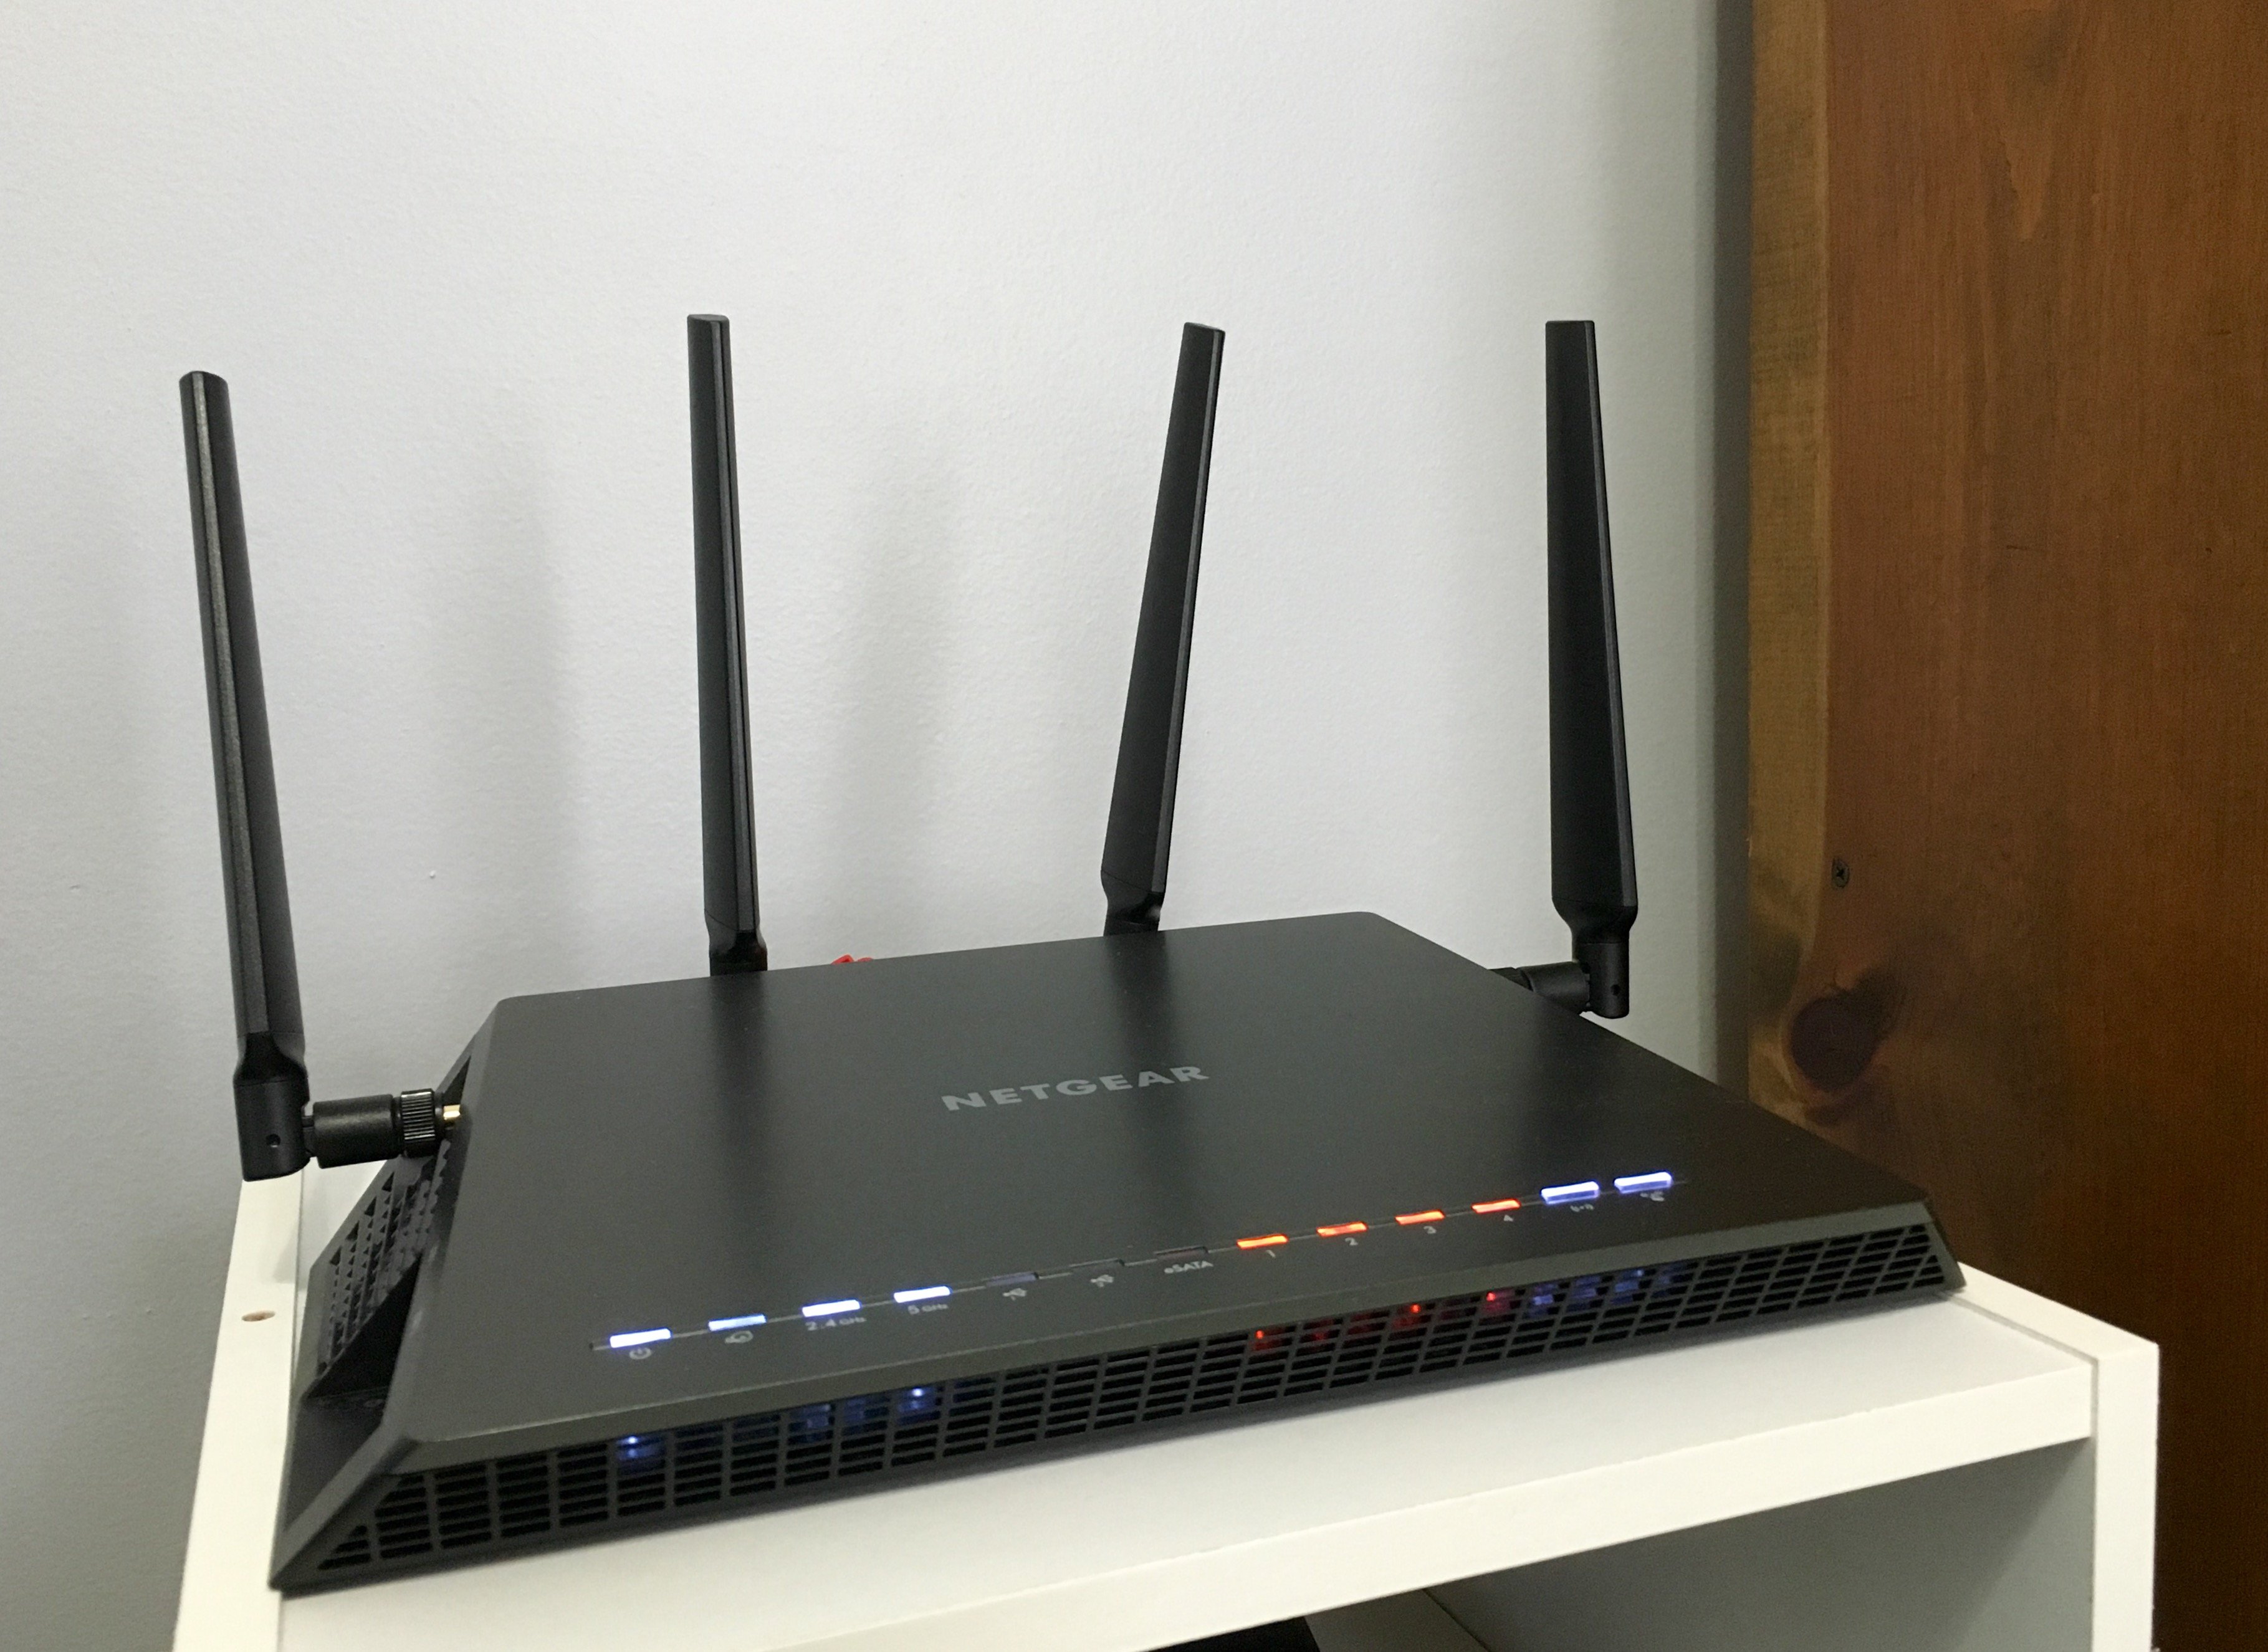 Read our Netgear Nighthawk X4S review to find out if this is the right router for you.